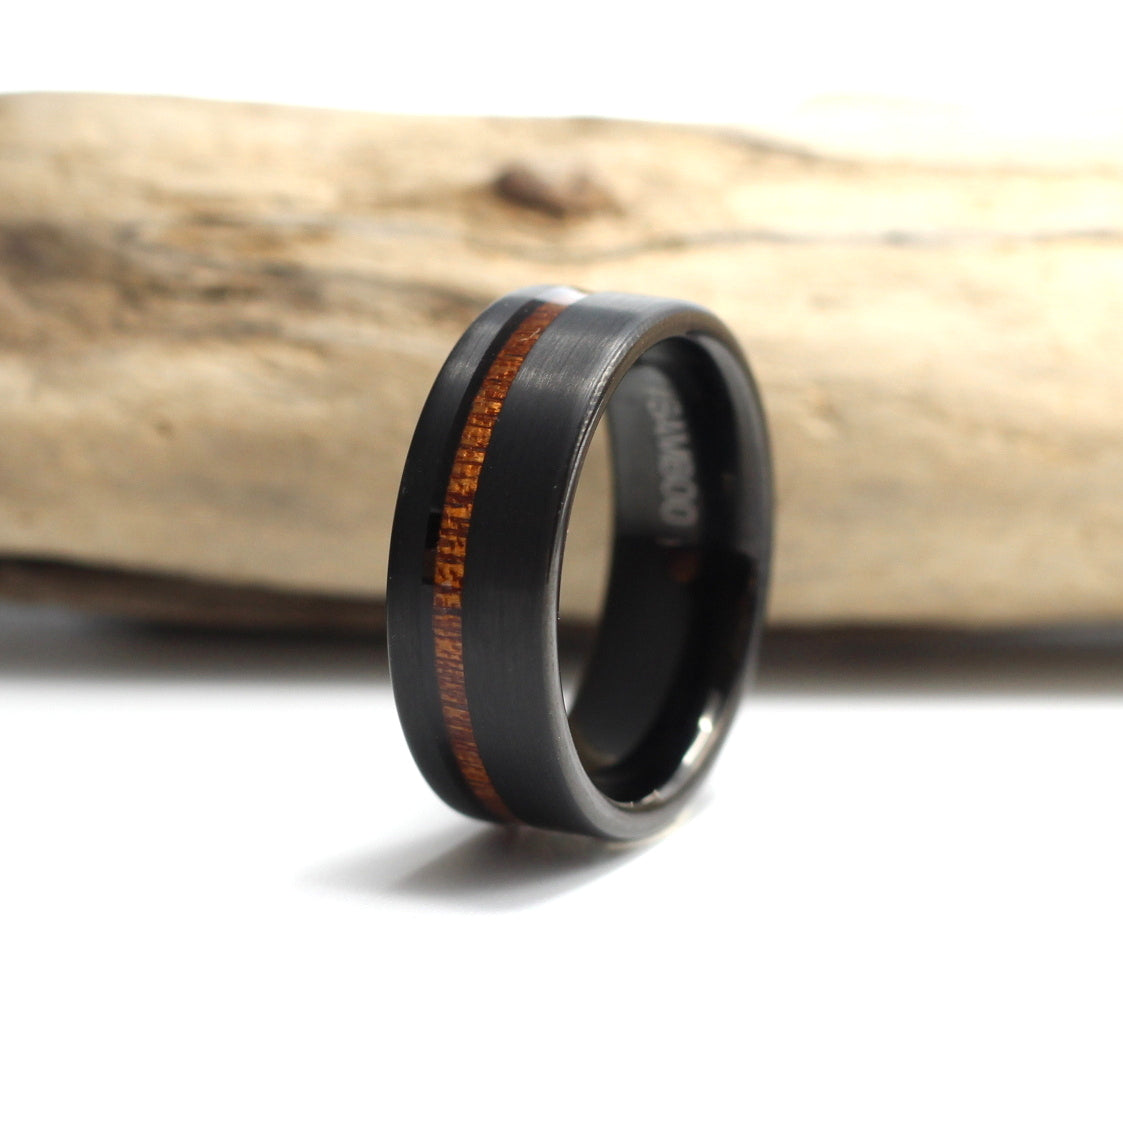 Men's black tungsten ring with koa wood offset inlay, 8mm, men's wedding band, engrave a message, hashtag bamboo.